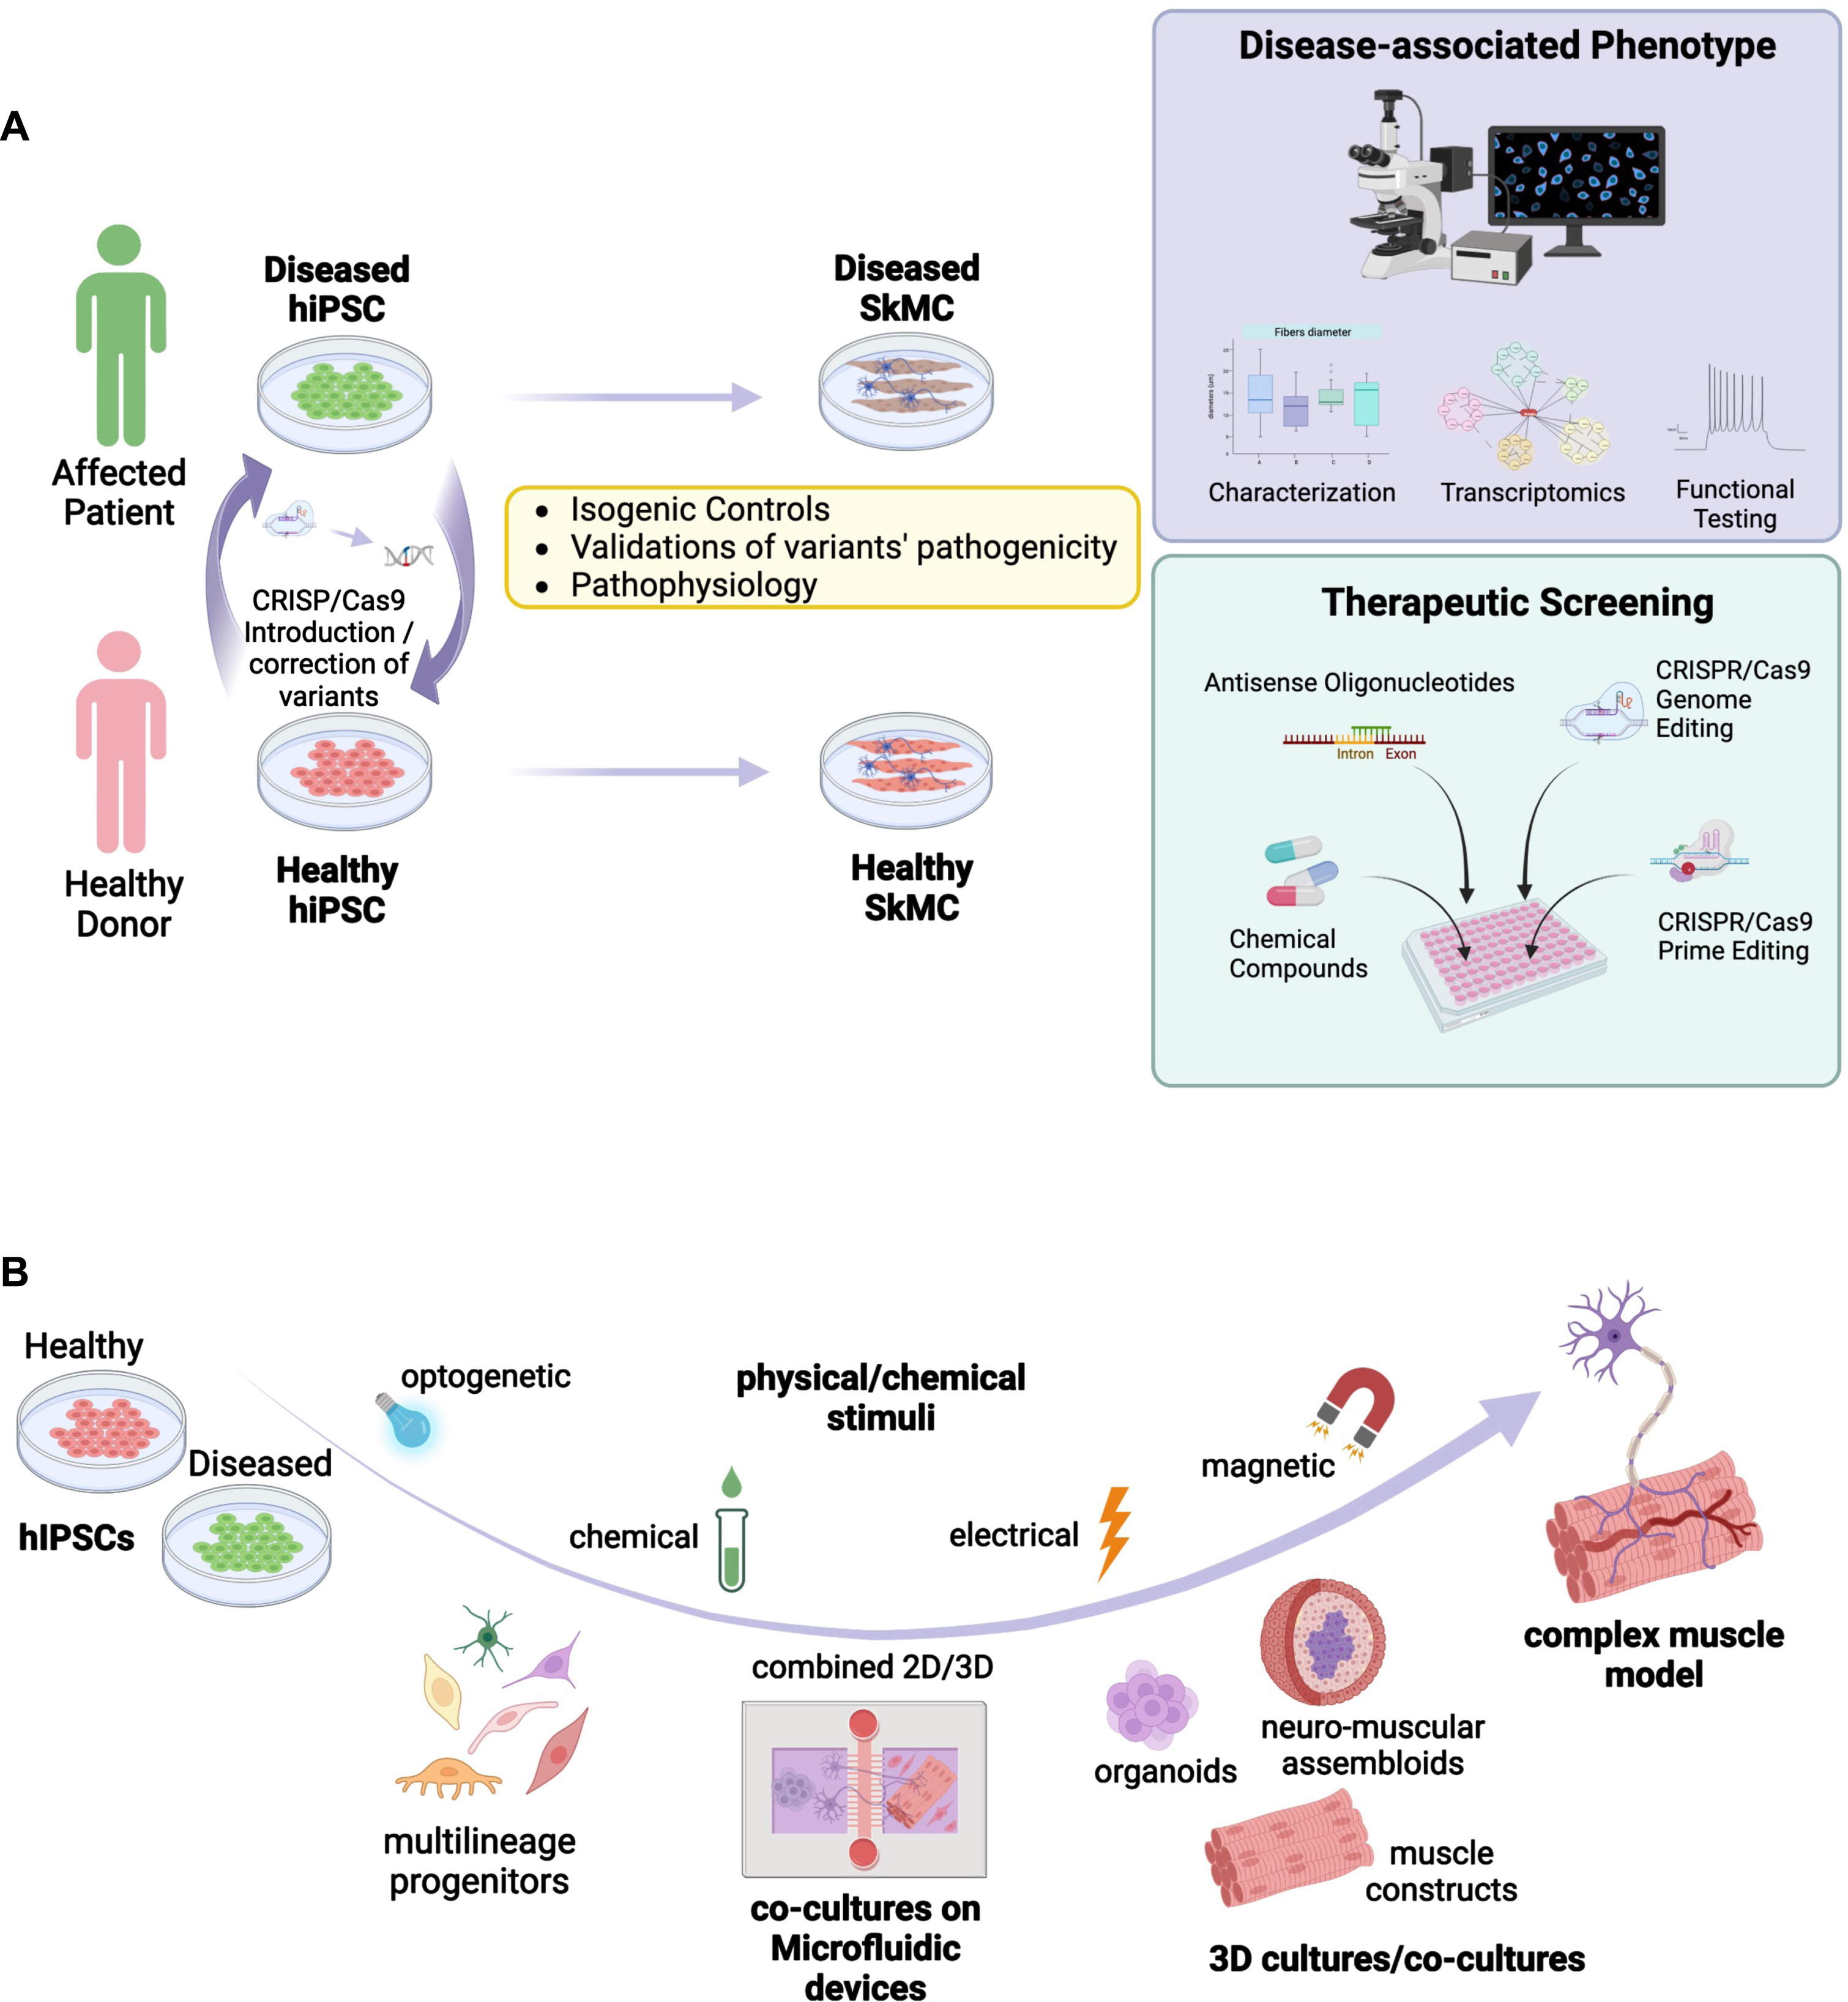 Summary of different in vitro approaches for modeling healthy and diseased skeletal muscle based on the use of induced pluripotent stem cells. A. Schematic representation of possible applications for modeling neuromuscular disorders using hiPSC together with approaches used for the development of therapeutic approaches. HiPSC are derived from NMD patients and healthy controls. The disease mutation can be corrected in patient’s cells, or introduced in healthy control cell lines, using the CRISPR-Cas9 technology. HiPSC are differentiated into skeletal muscle cells (SkMC). The cell phenotype of diseased and healthy cells can be compared by different approaches, including functional testing. HiPSC-SkMC can also be used for screening and development of new therapeutics. B. Schematic representation of different applications and 3D culture systems of hiPSC-derived multilineage progenitors including co-culture in microfluidic devices (2D/3D), 3D culture models for the development of complex mature muscle models. Different physical/chemical stimuli used to induce muscle contractions or maturation are represented.